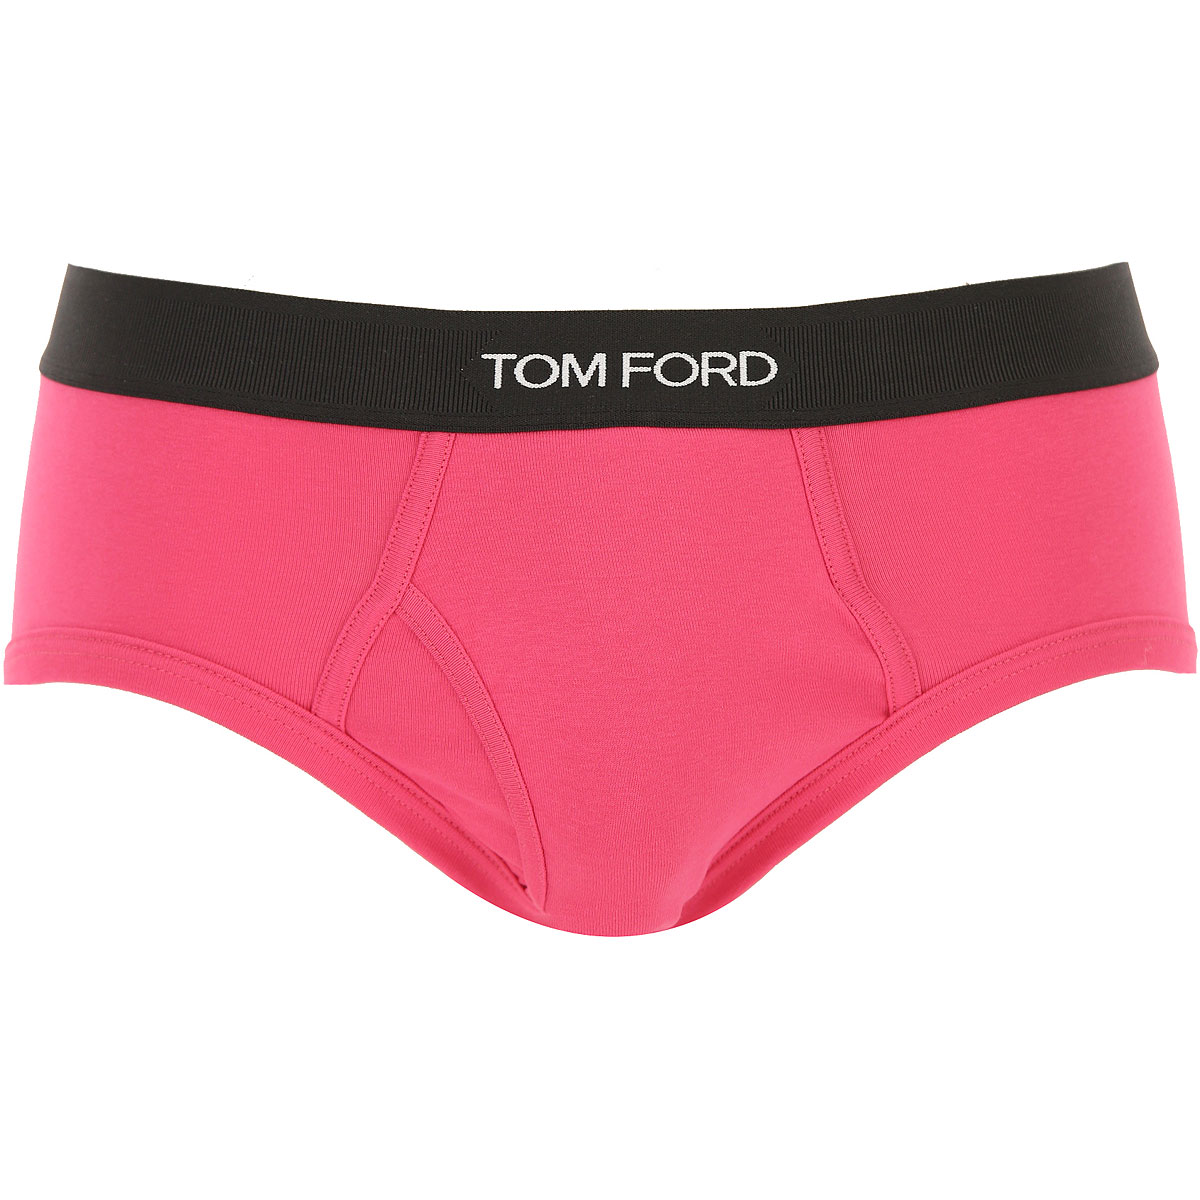 Mens Underwear Tom Ford, Style code: t4lc1-1040-672